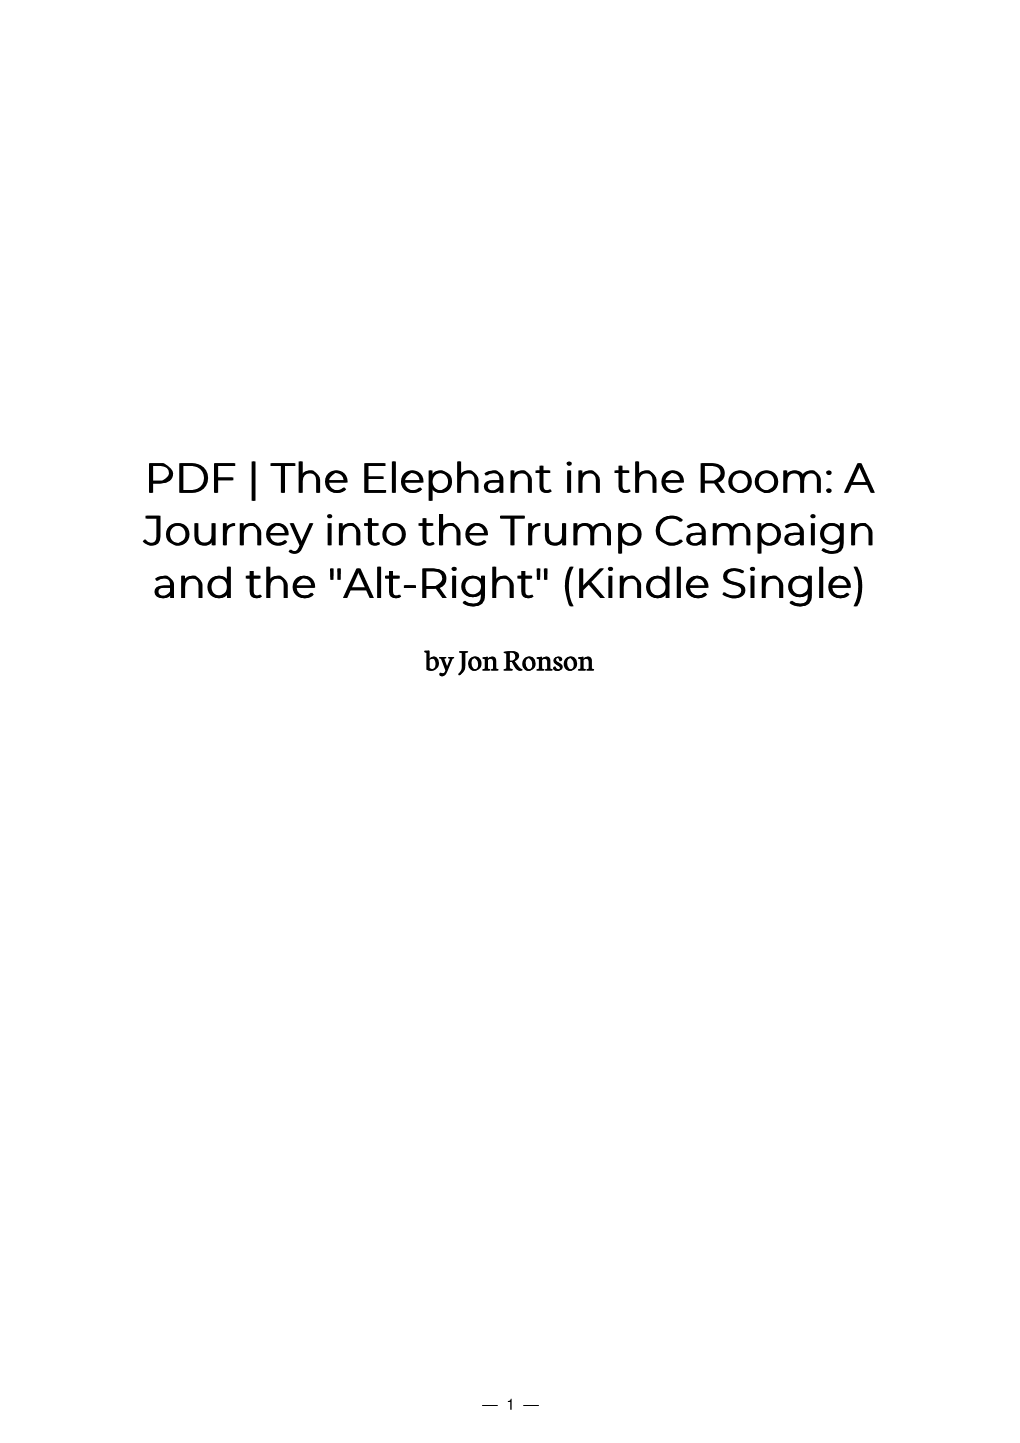 The Elephant in the Room: a Journey Into the Trump Campaign and the "Alt-Right" (Kindle Single)